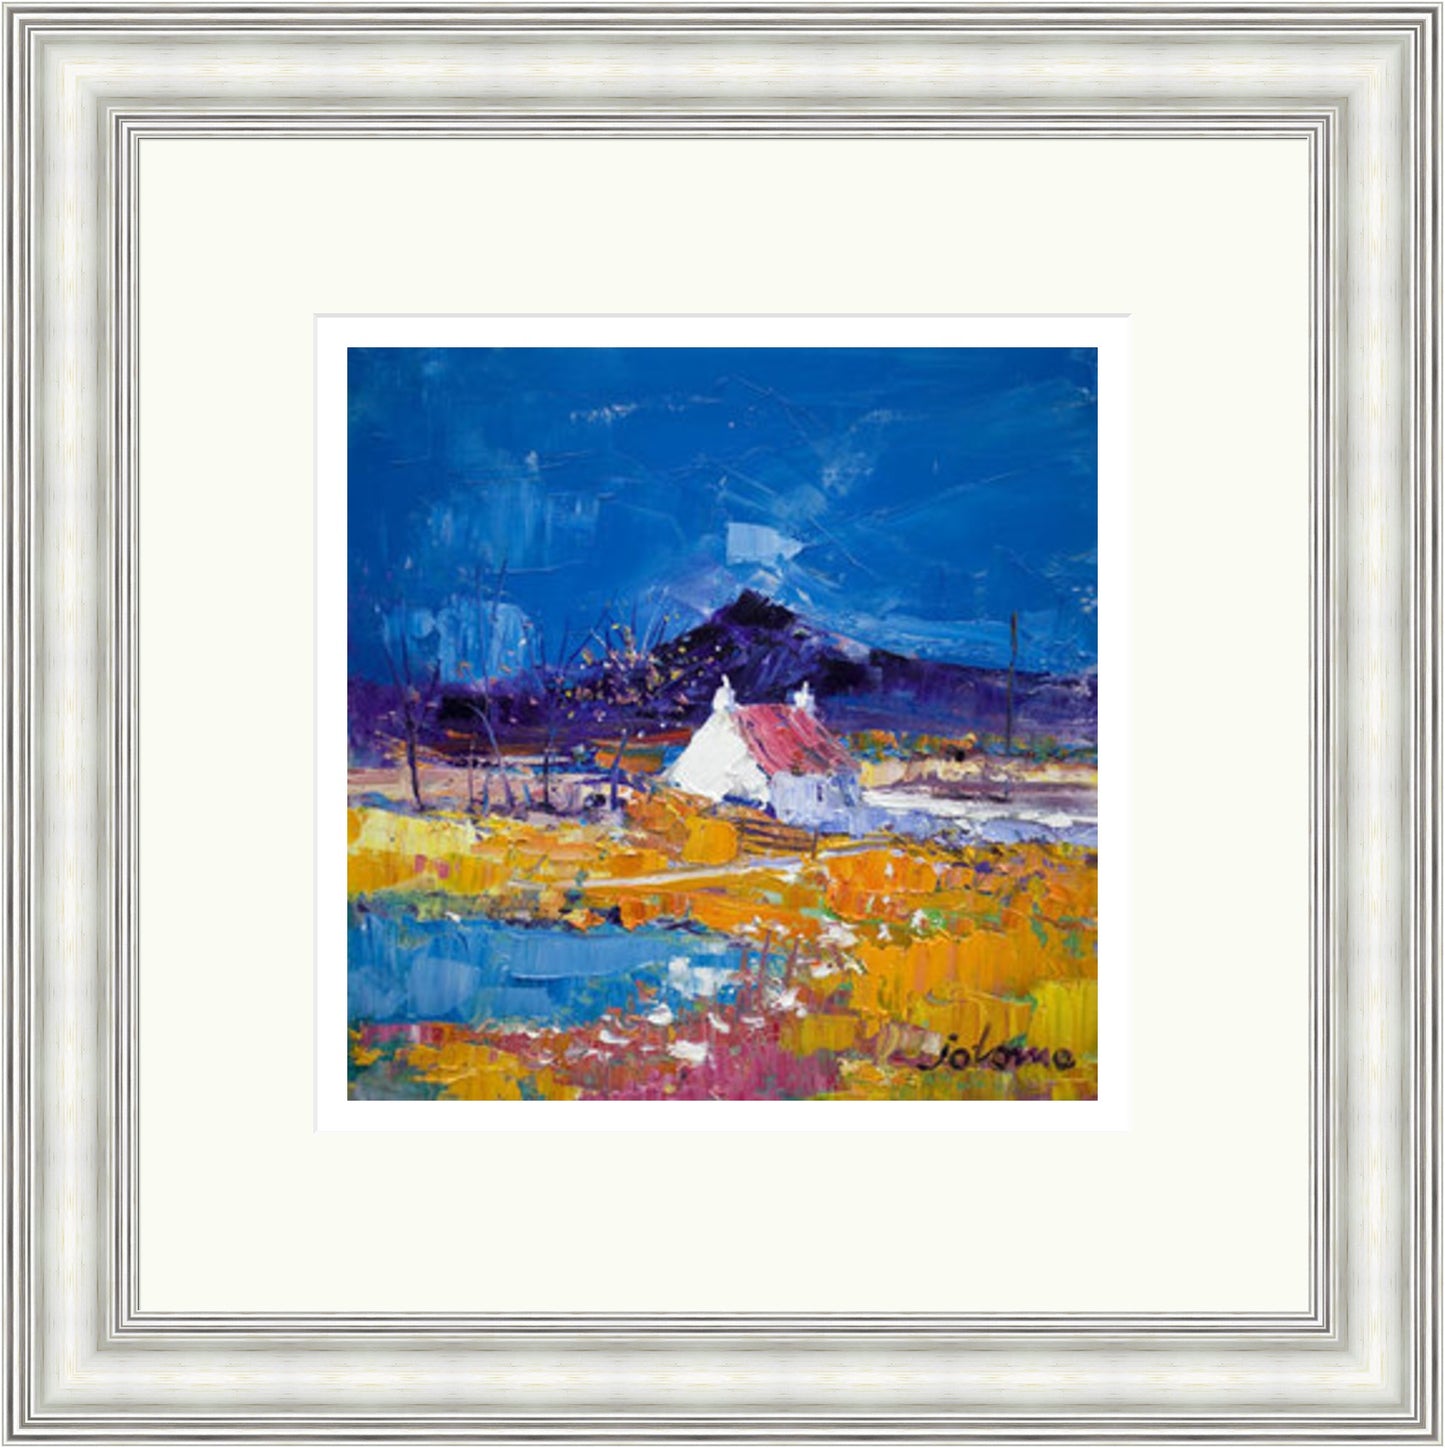 Autumn Light, Pennyghael, Isle of Mull Signed Limited Edition by John Lowrie Morrison (JOLOMO)